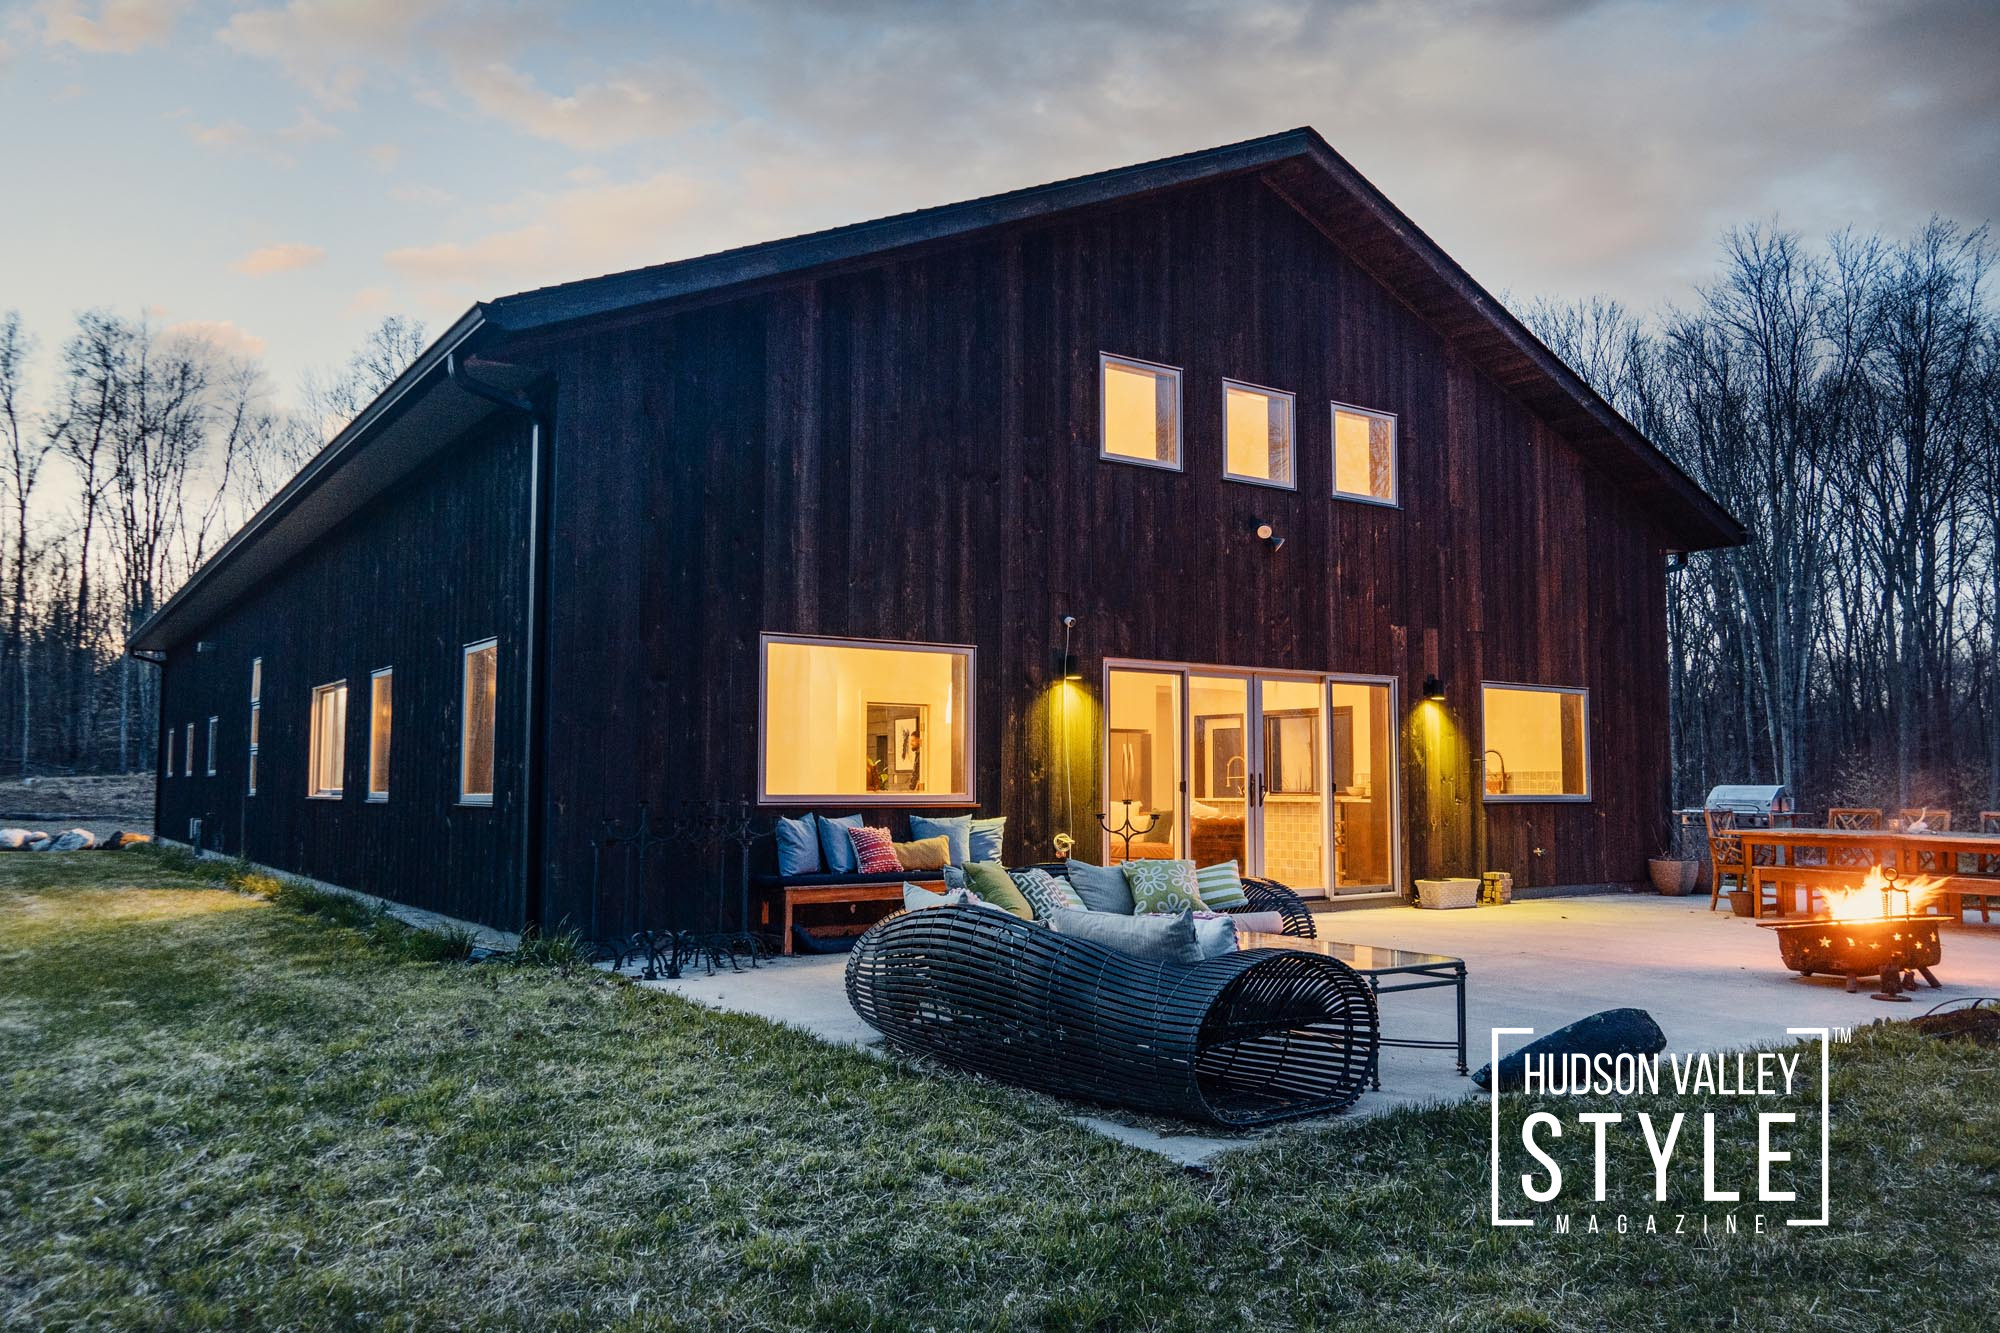 The Top 10 Reasons Why You Should Move To Upstate New York – Presented by Duncan Avenue Studios / ALLUVION MEDIA – Hudson Valley and Catskills Real Estate + Airbnb Photography by Maxwell Alexander